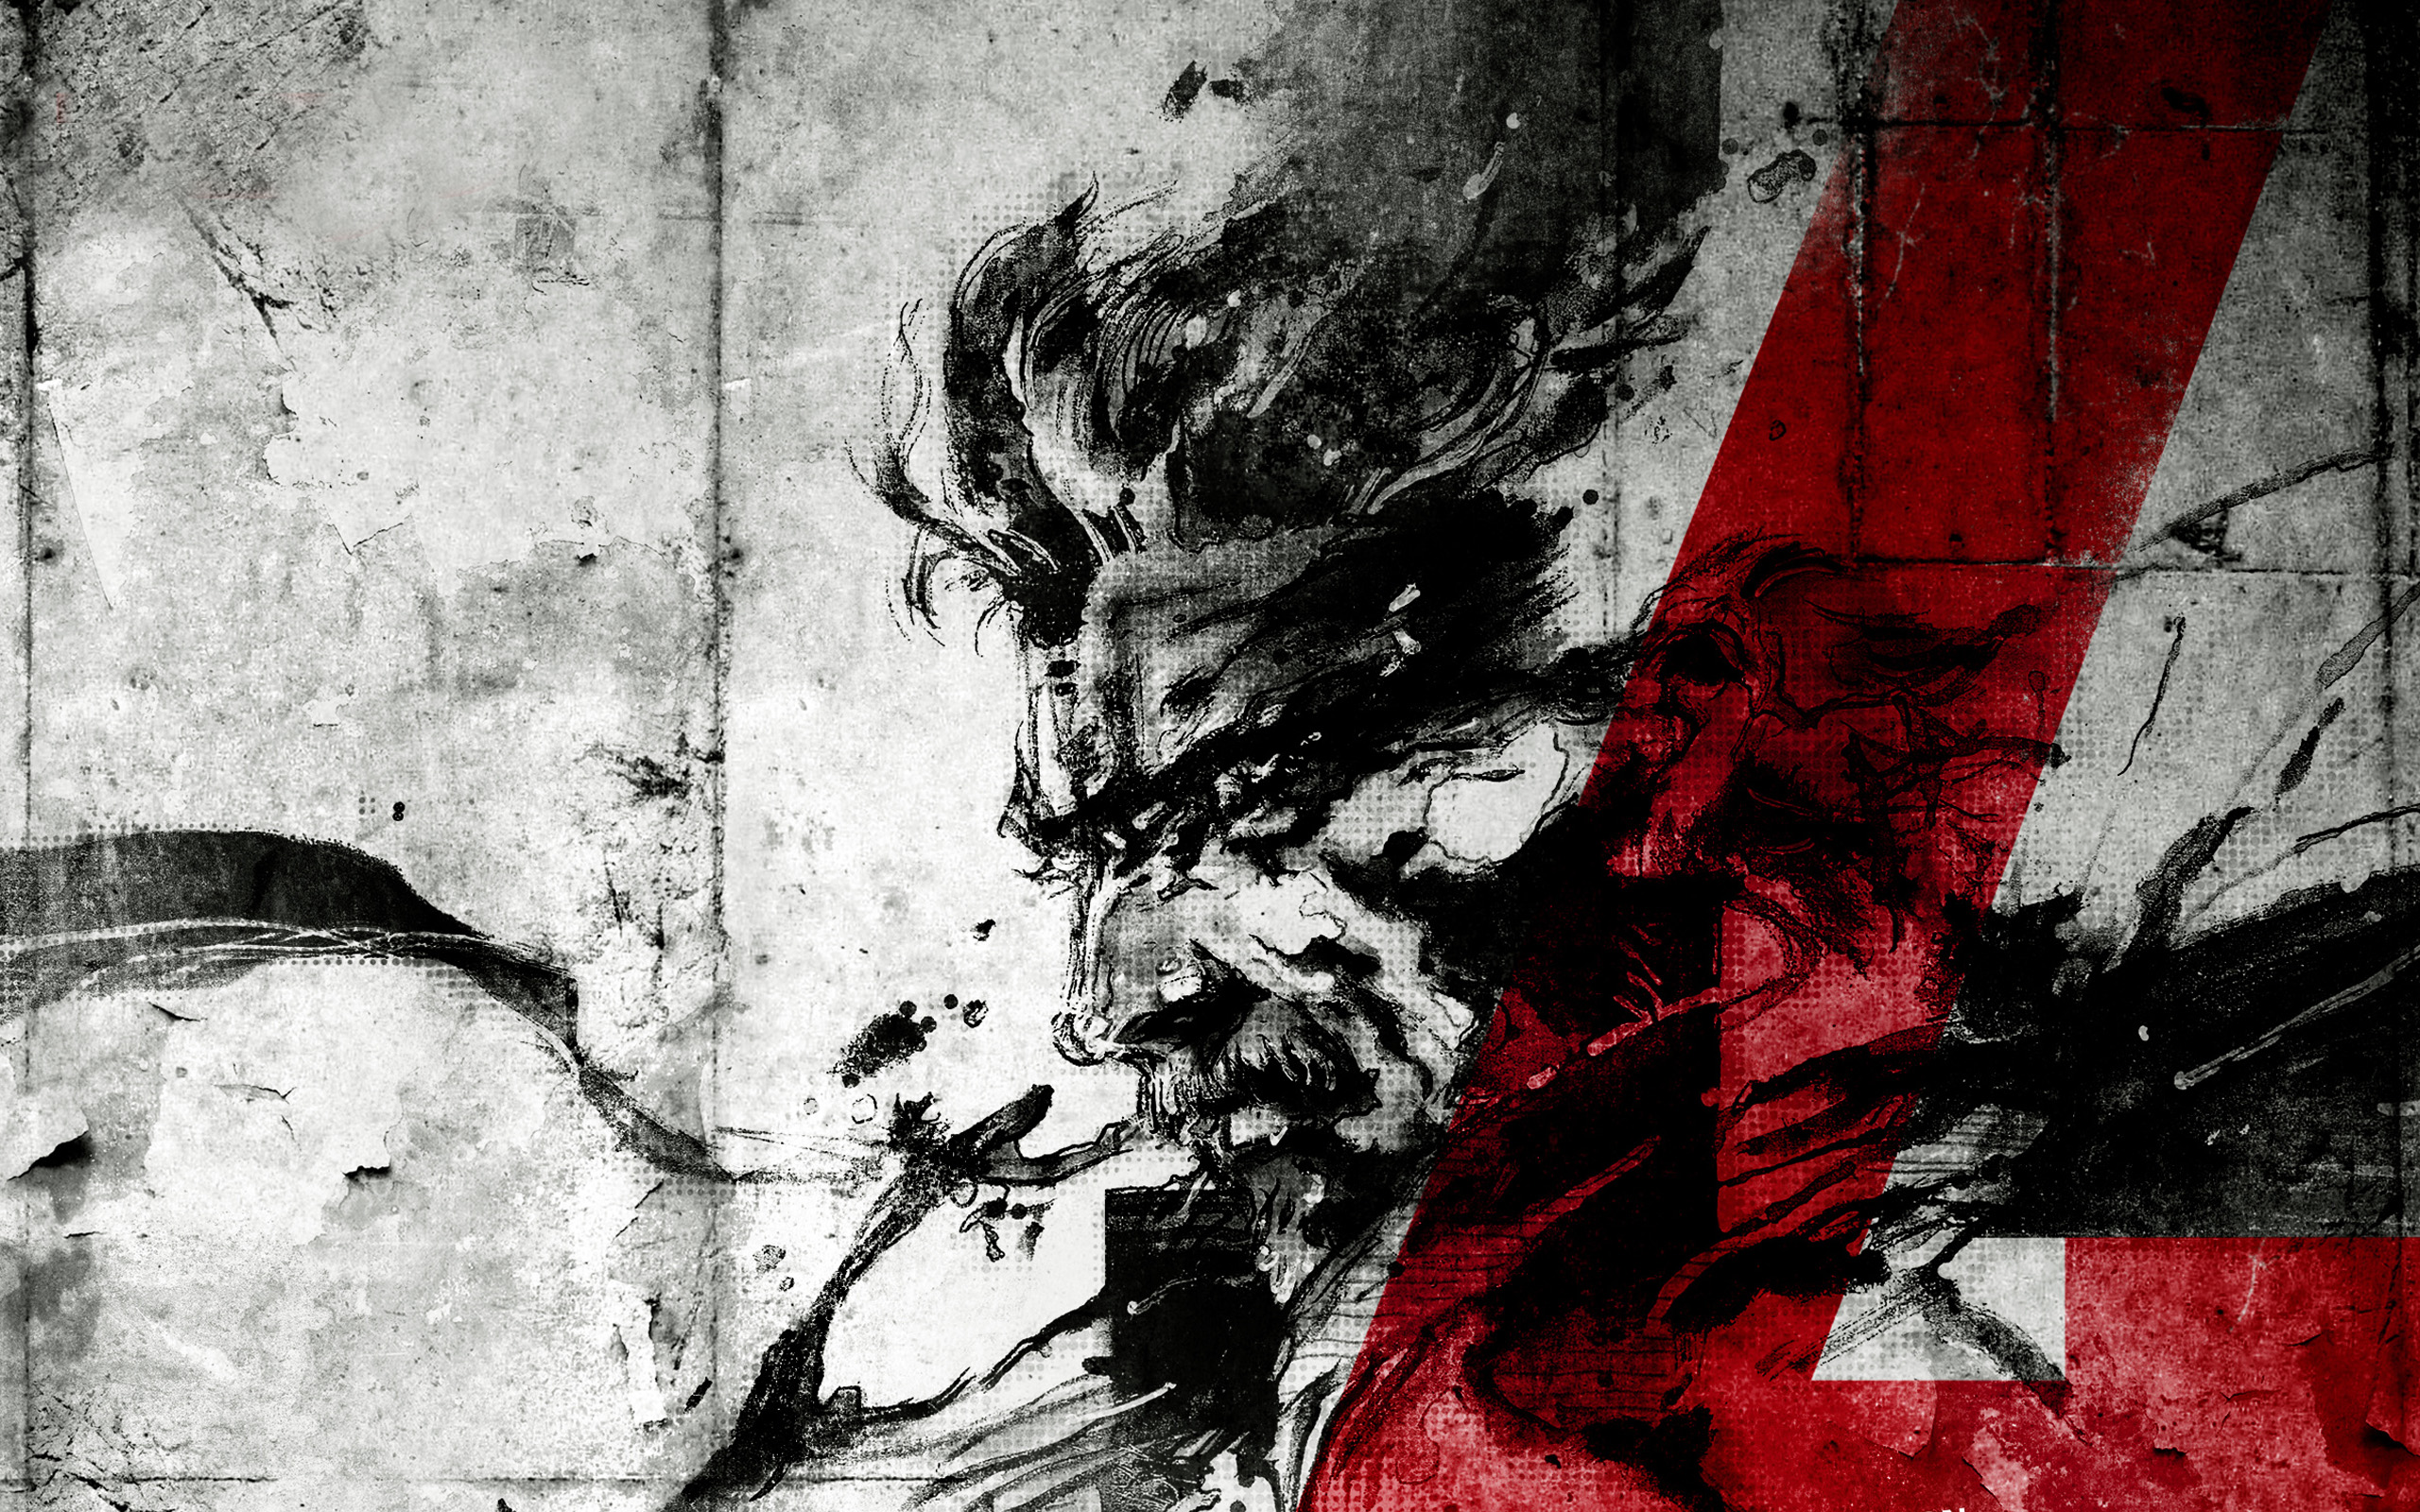 metal gear solid 4 wallpaper snake  HD Photo Wallpaper Collection HD